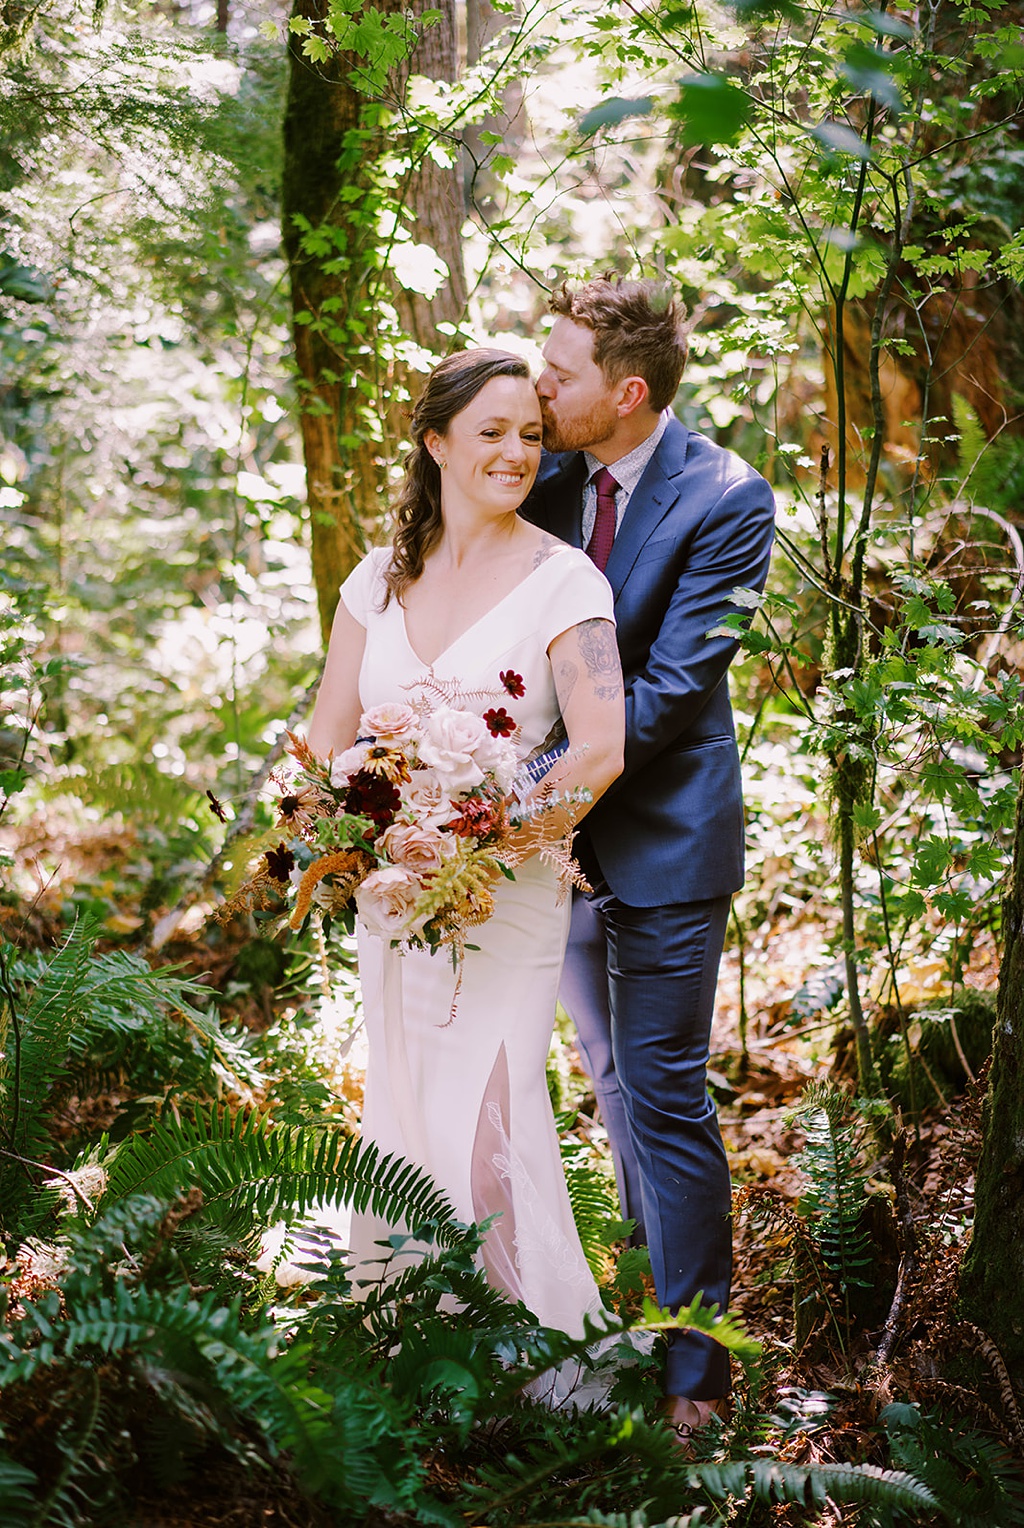 The couple stands in the forest holding the bridal bouquet